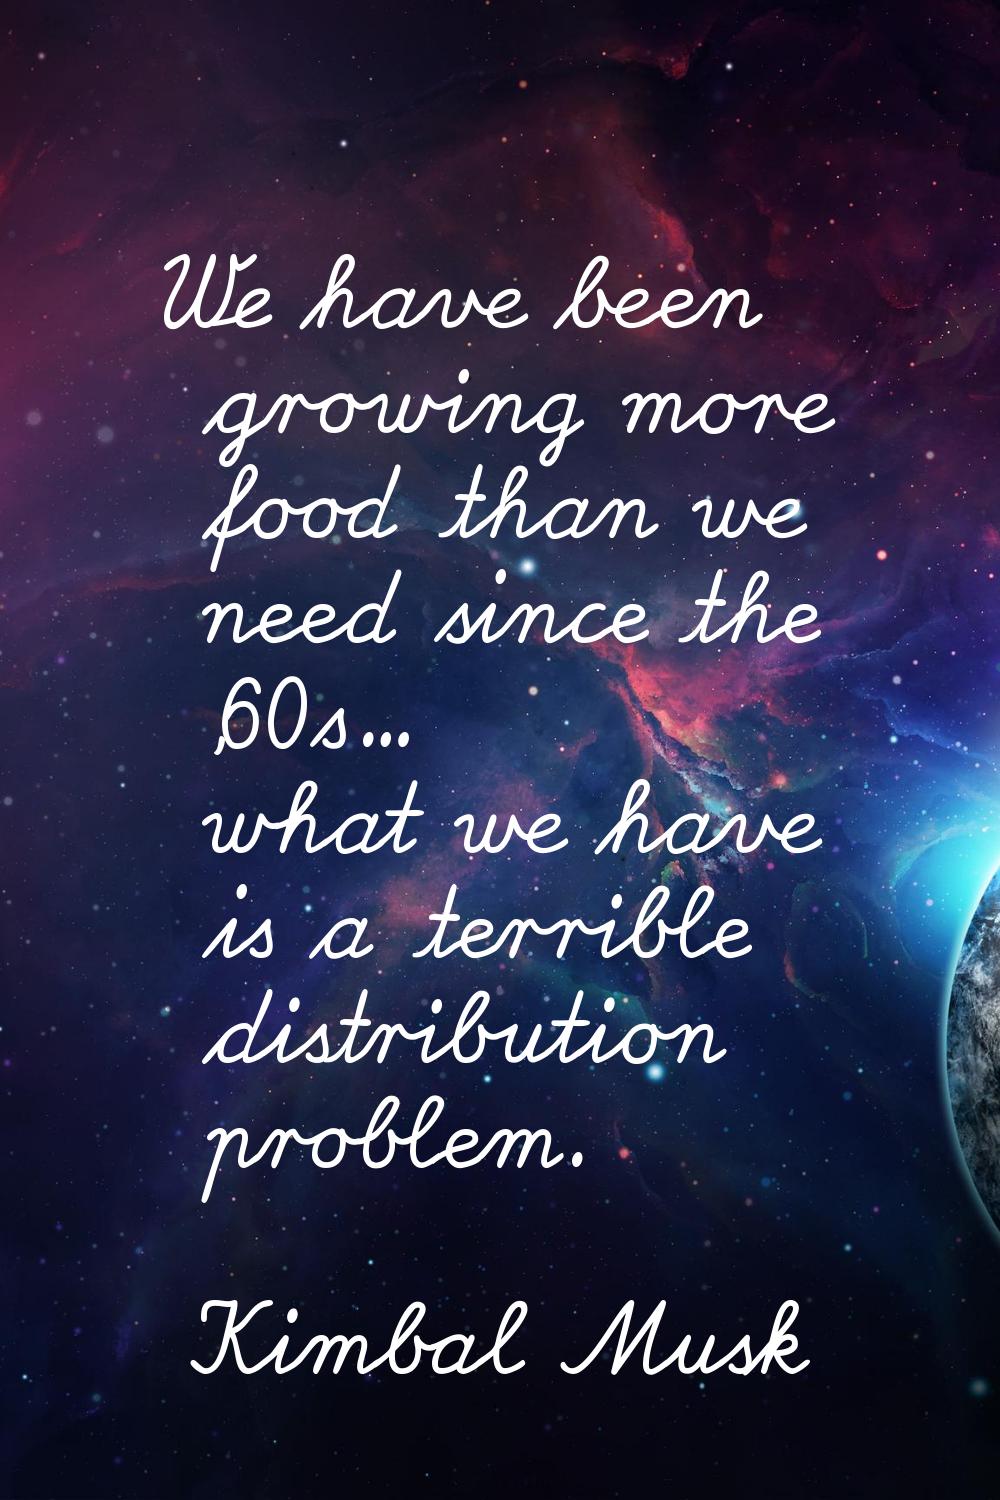 We have been growing more food than we need since the '60s... what we have is a terrible distributi